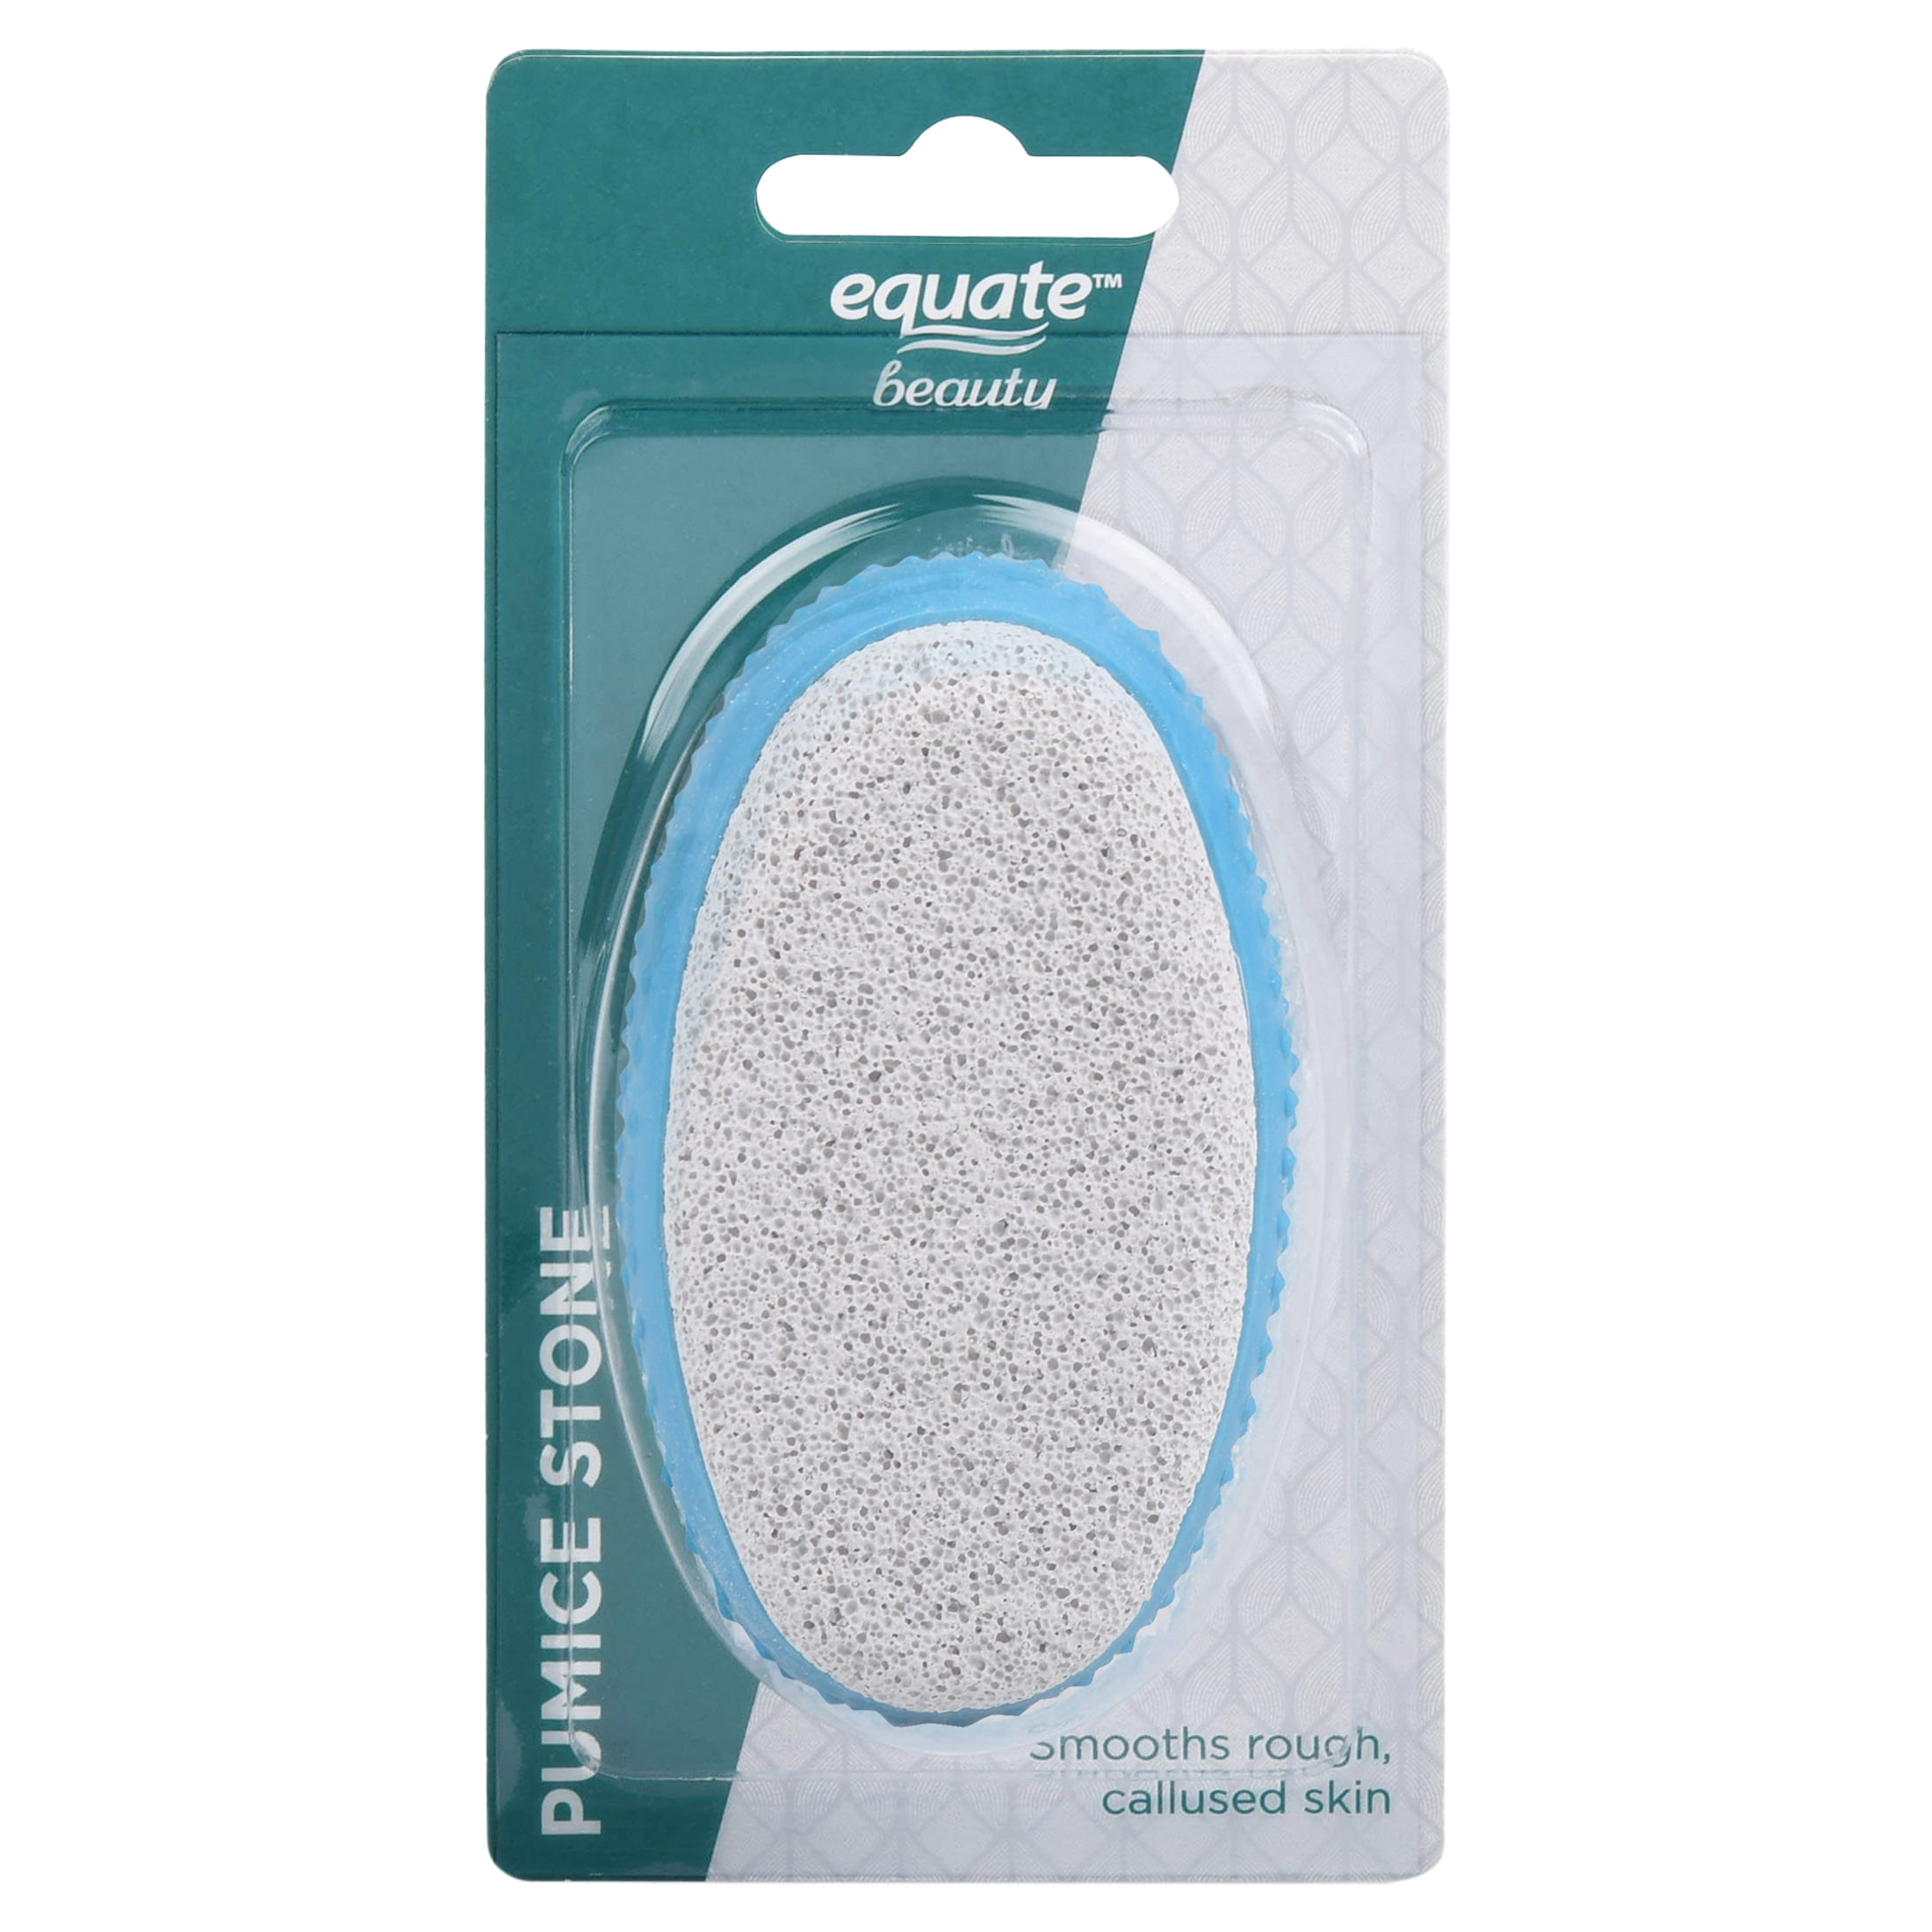 Equate Beauty Oval-Shaped Foot Pumice Stone With Grip Massager